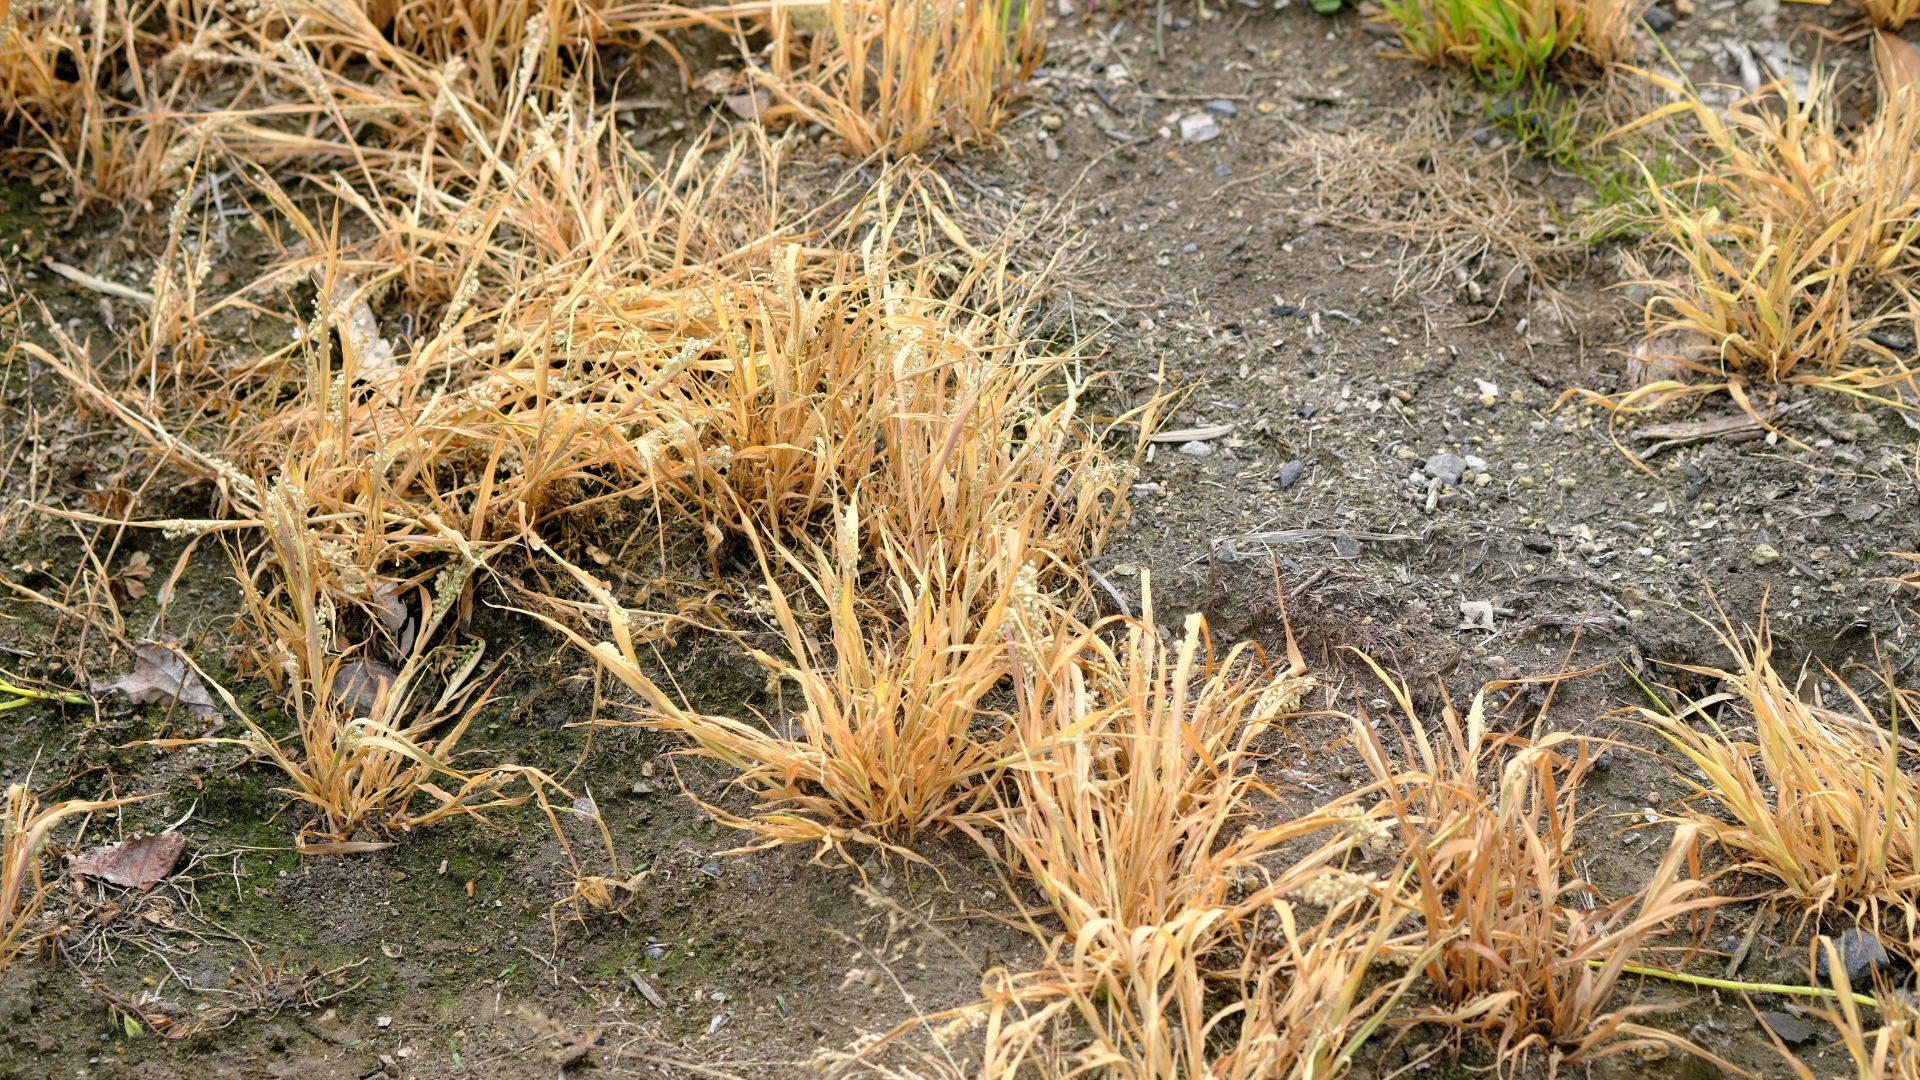 An image of grass killed by a non-selective herbicide.